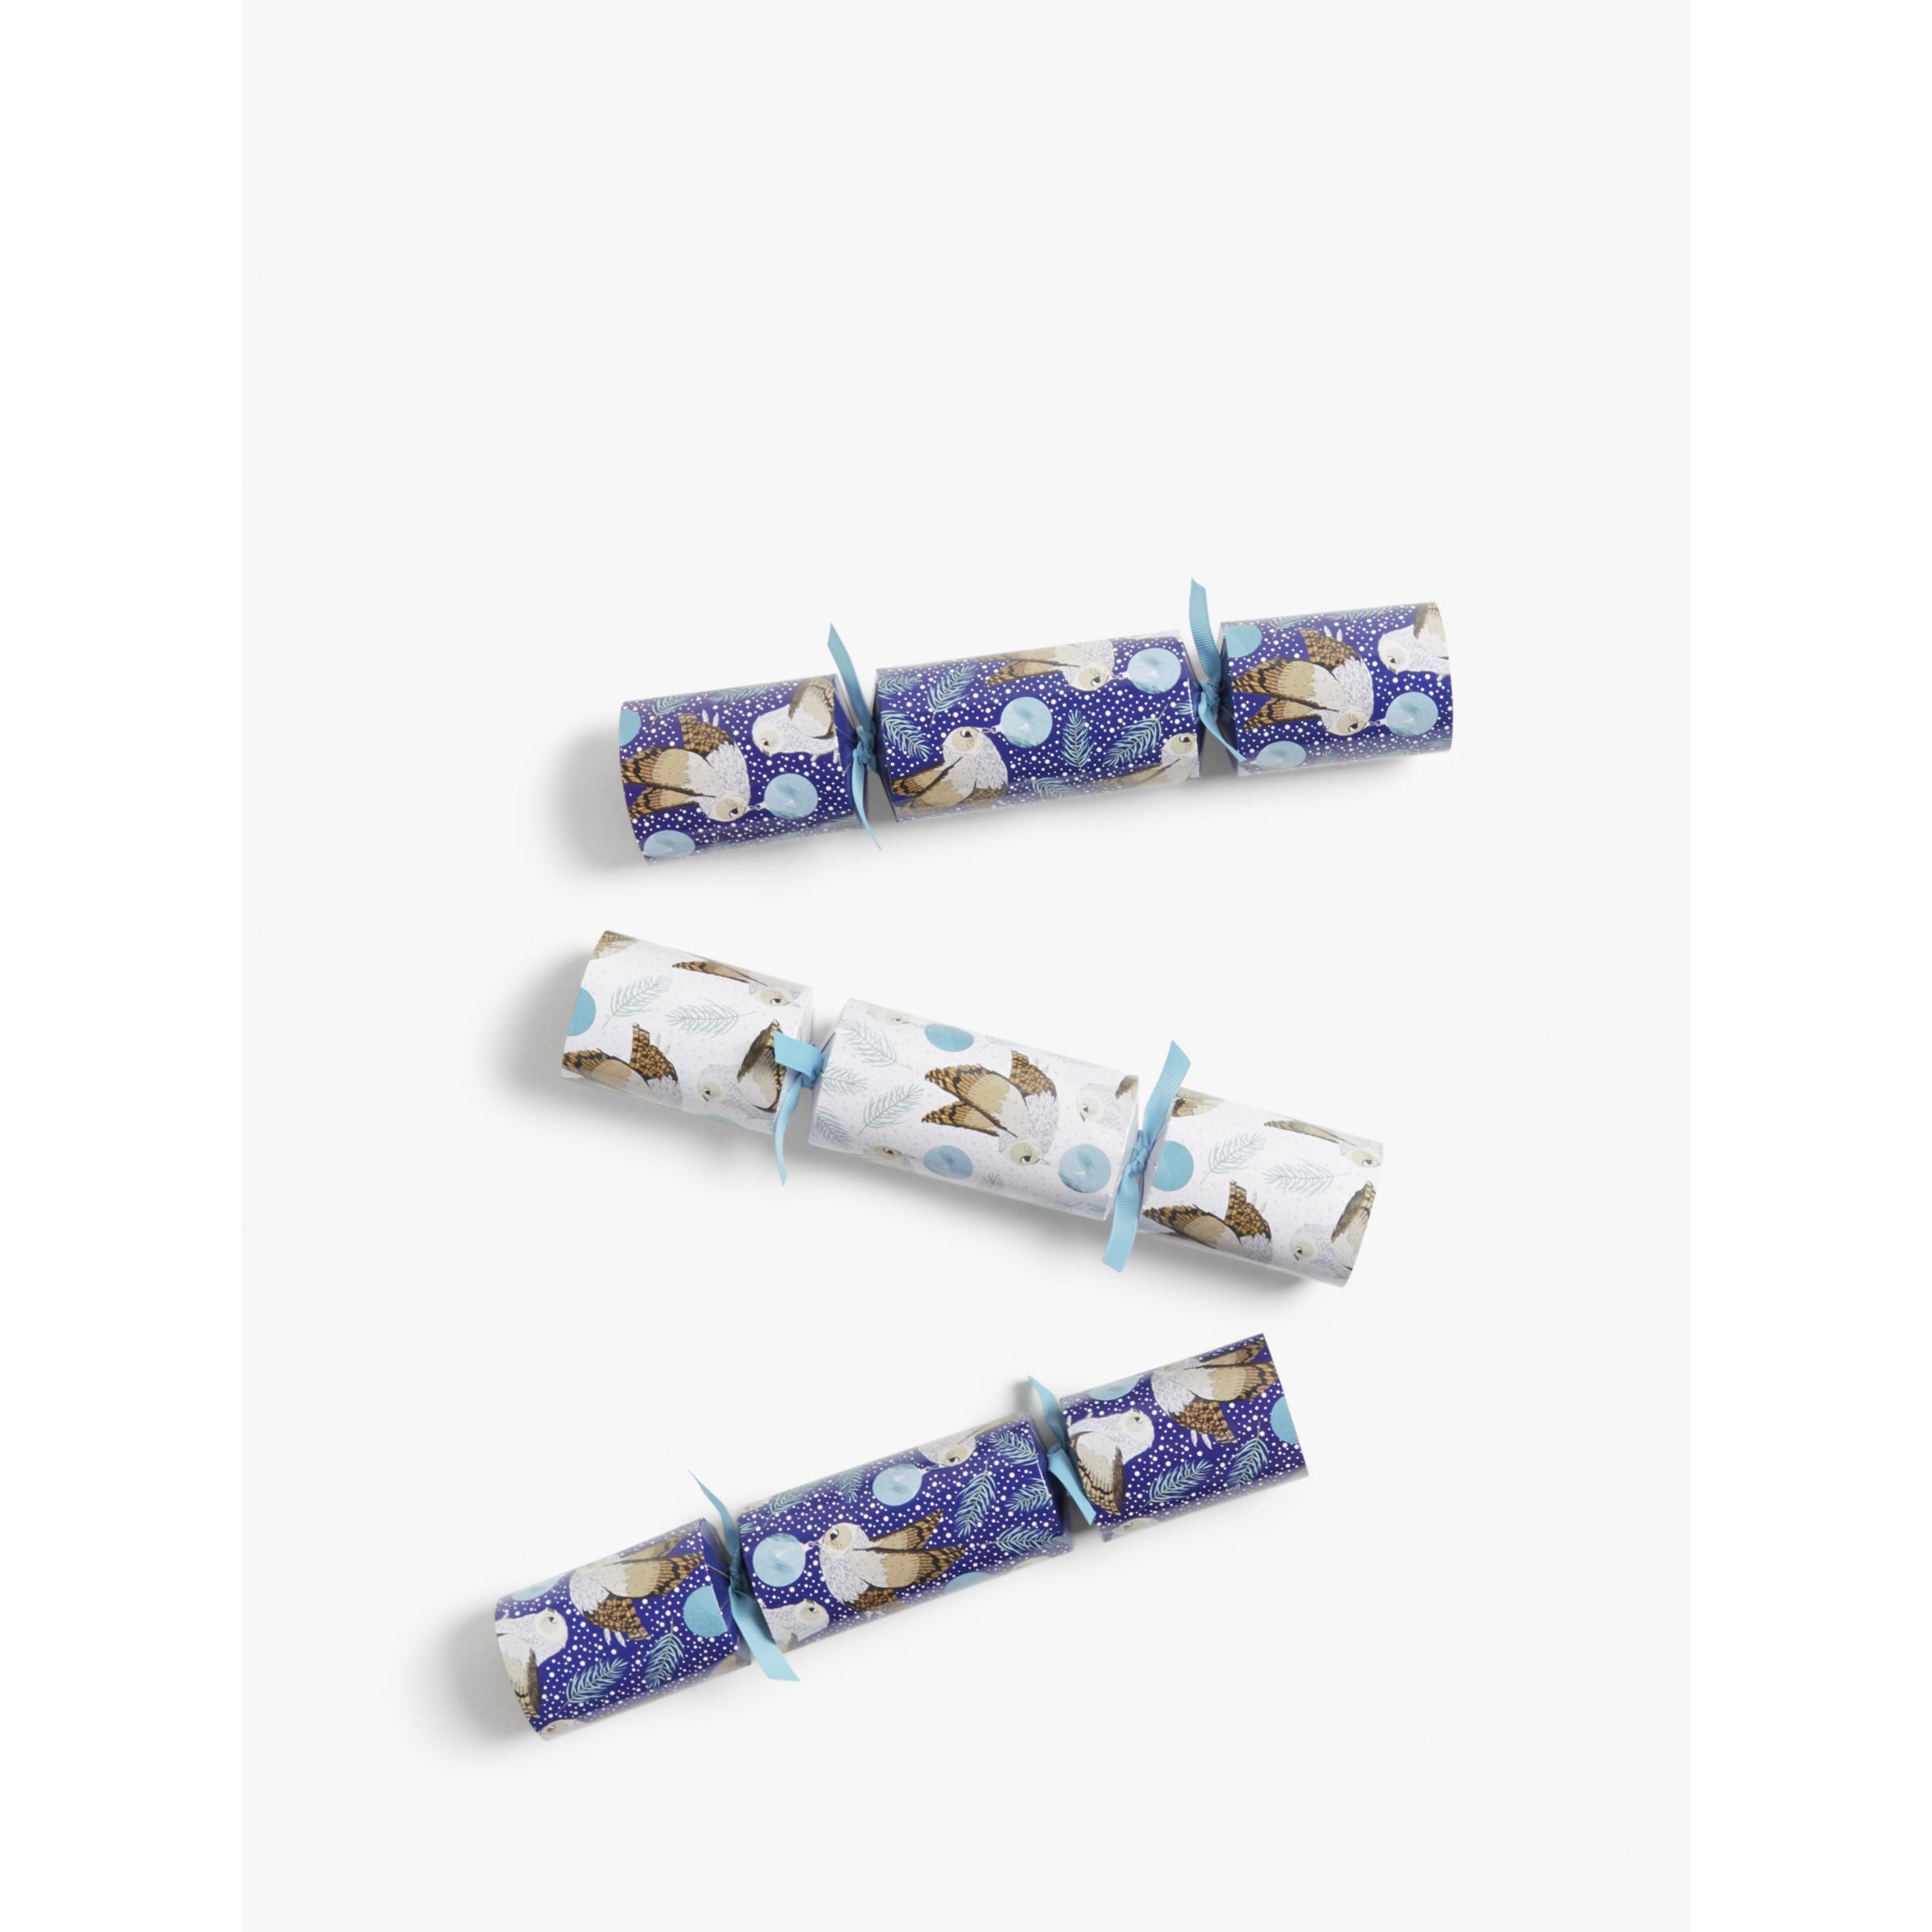 John Lewis & Partners Snowscape Snowy Owl Christmas Crackers, Pack of ...